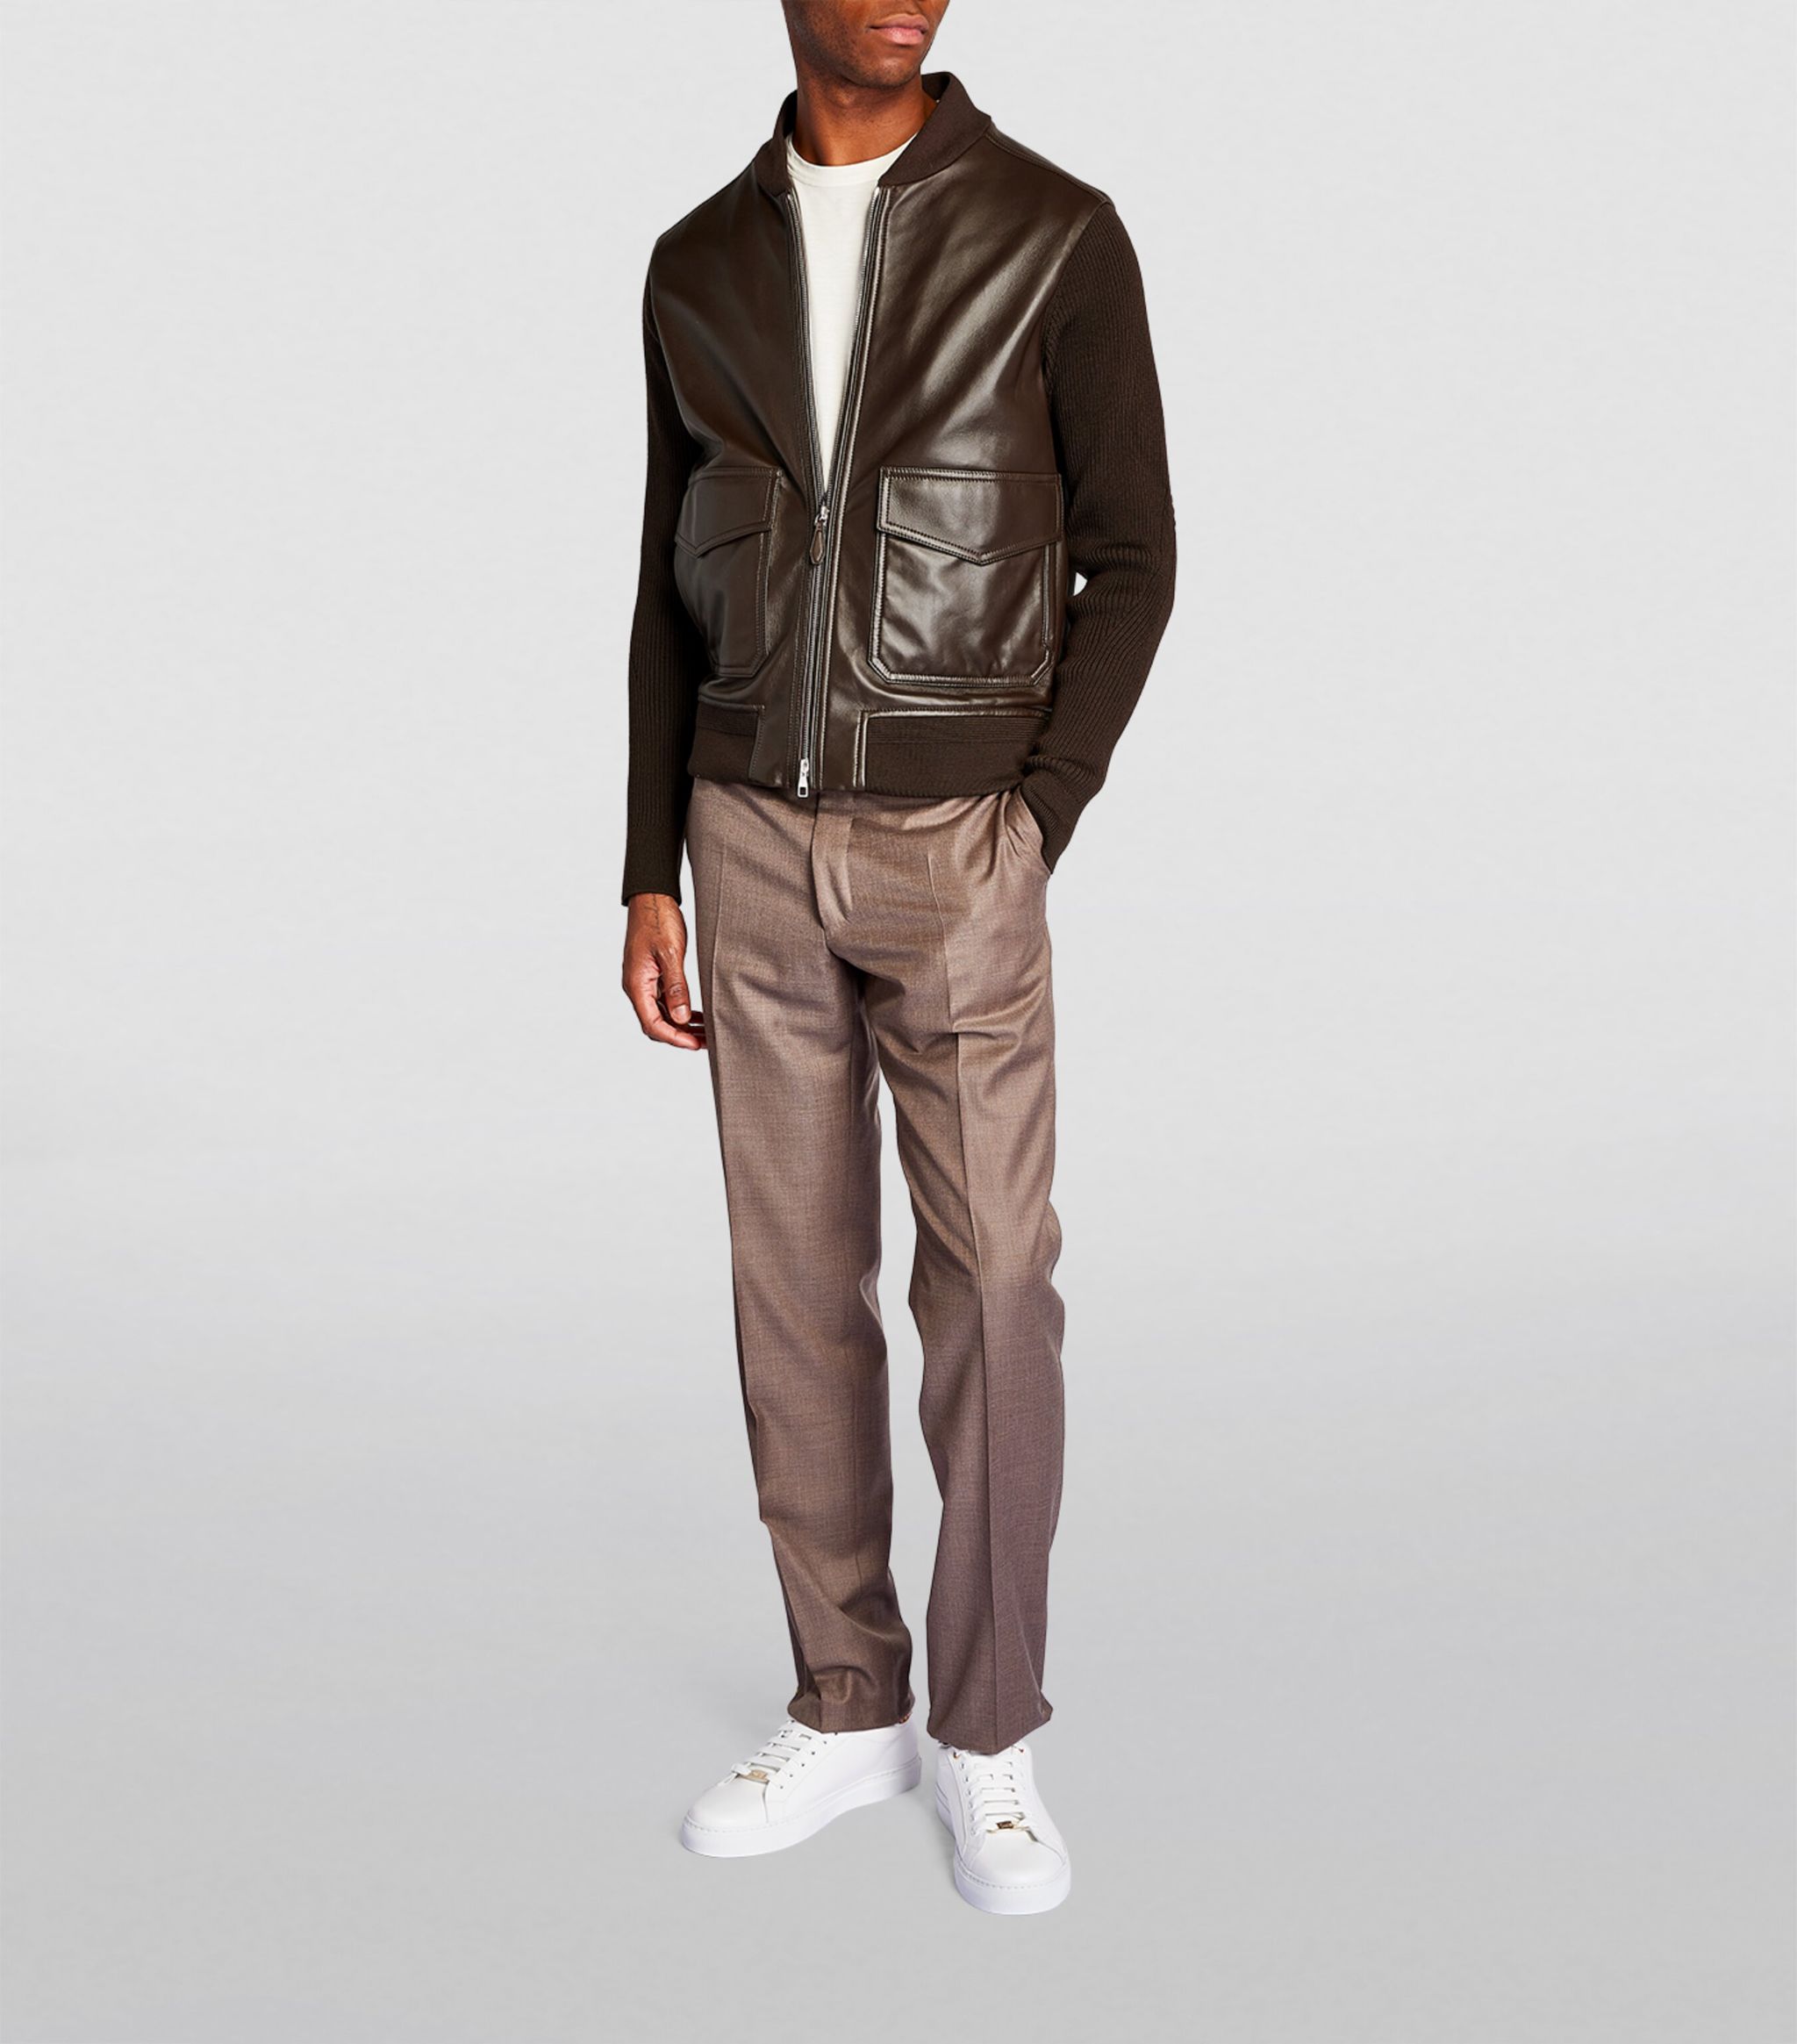 Dunhill Leather-Wool Bomber Jacket